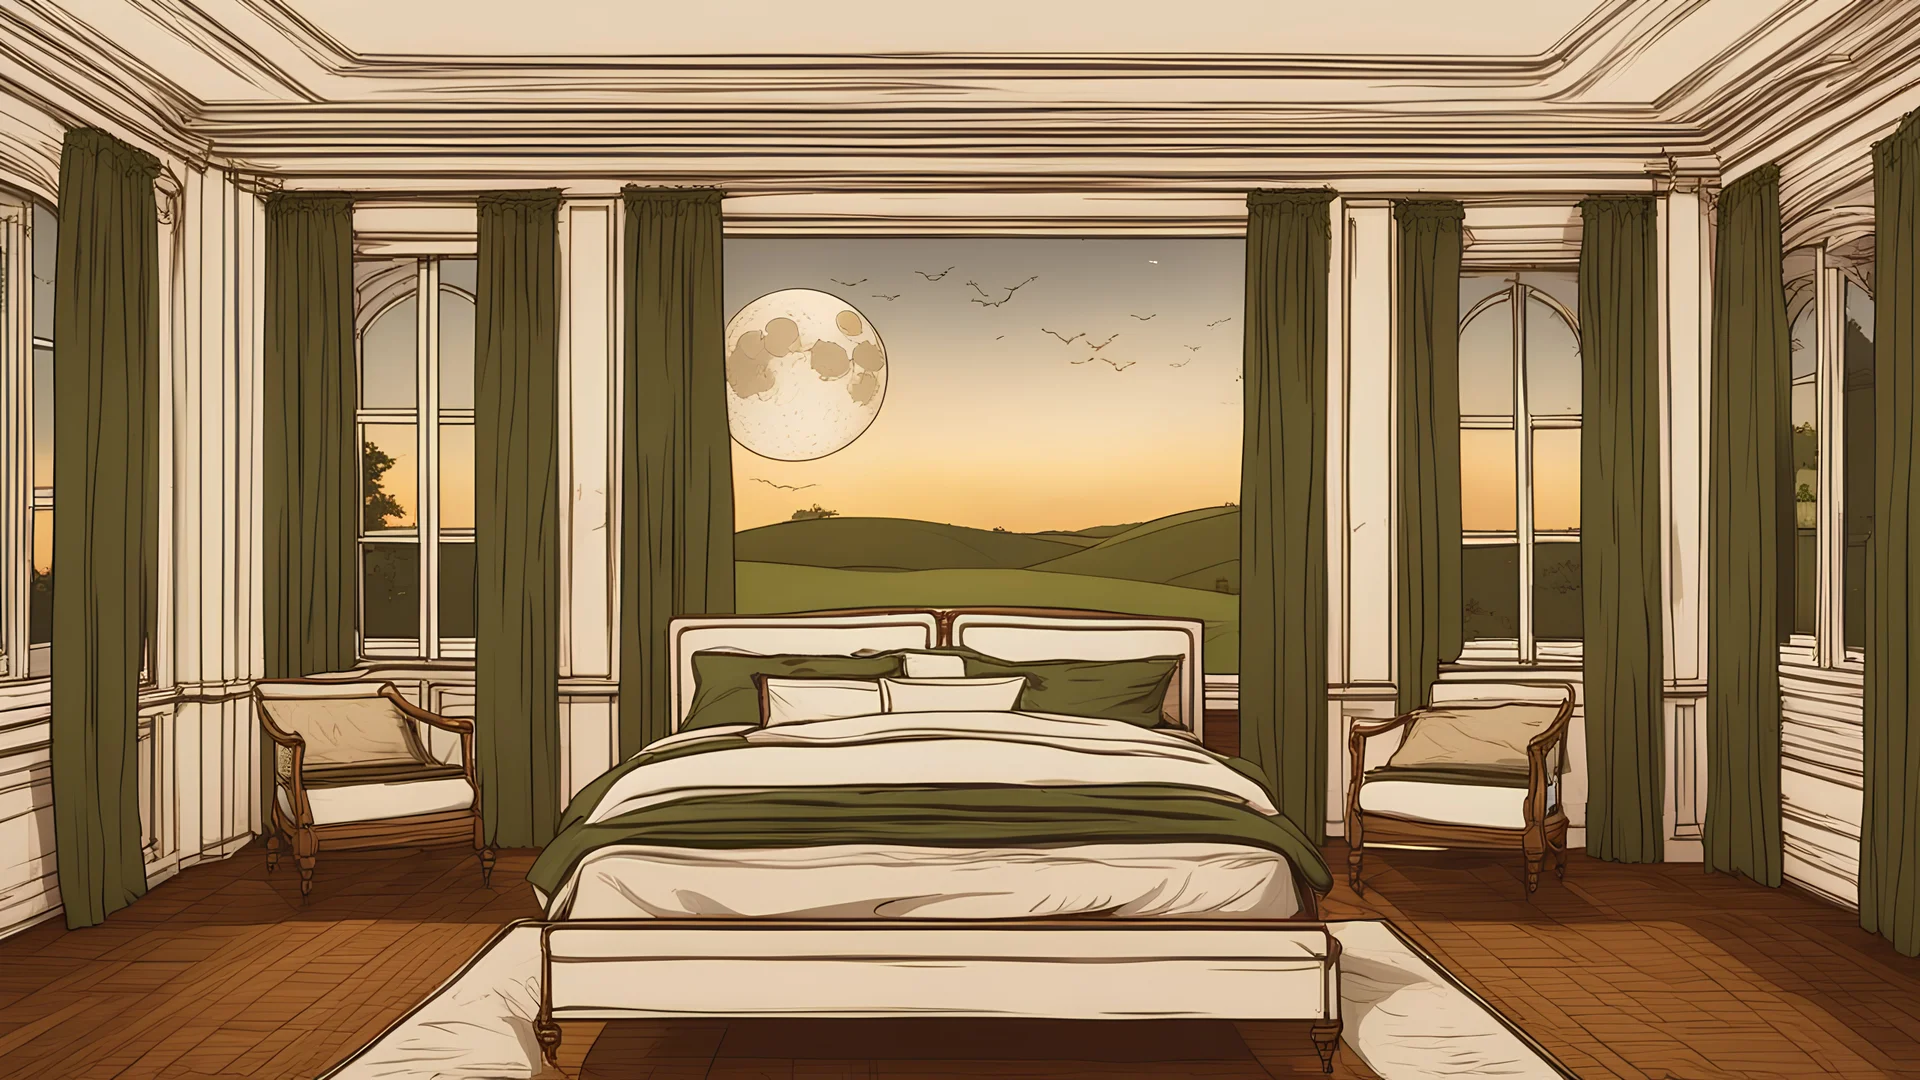 Night scene: On the right side is a row of tall, luxurious and elegant windows with rich details. Outside the window is a green, slightly higher grassland, which looks even more mysterious under the moonlight at night. Inside the window is a warm and comfortable room with wood grain floors. On the left side of the room is a luxurious and warm white bed with bedside lamps on both sides of the bed. There are five brightly colored, beautiful, high-quality and comfortable wooden sofa chairs in the r